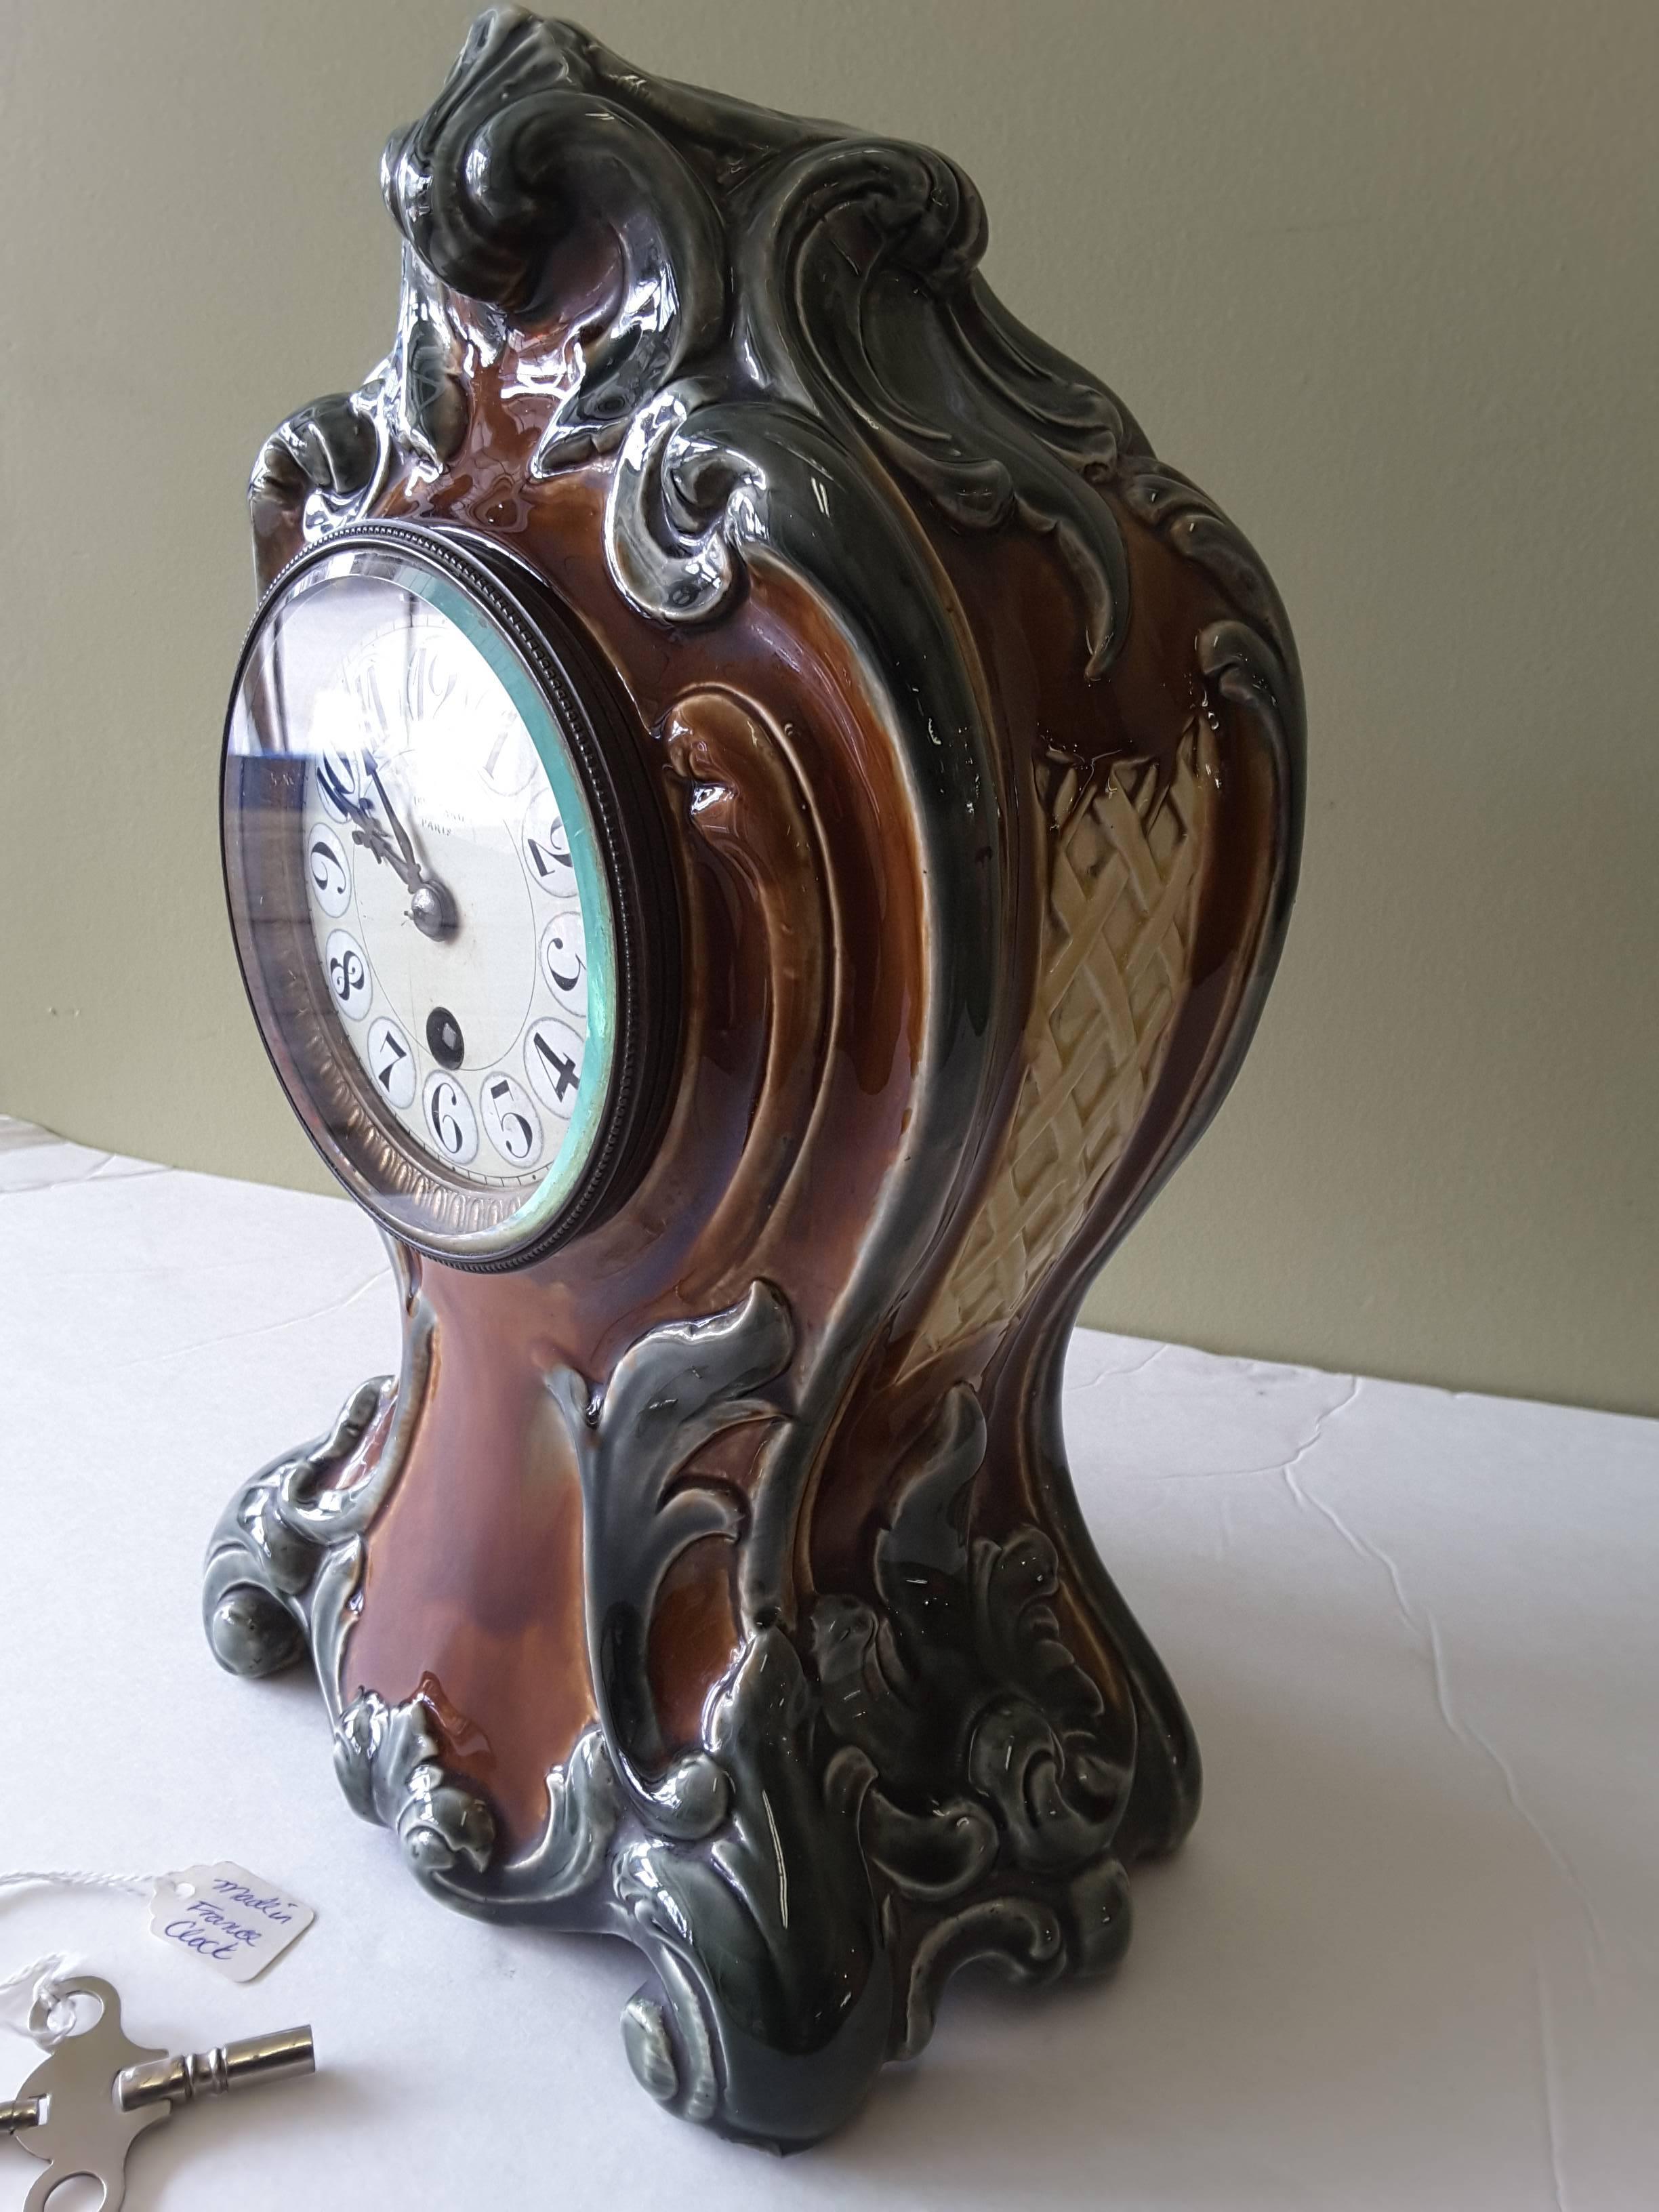 Art Nouveau French Majolica clock, Paris, circa 1880-1900, The clock is an 8 day cylinder movement, marked only with a number 67731, single pendulum and single wind hole with non-chiming movement. The clock is in Fine working condition. The dial is